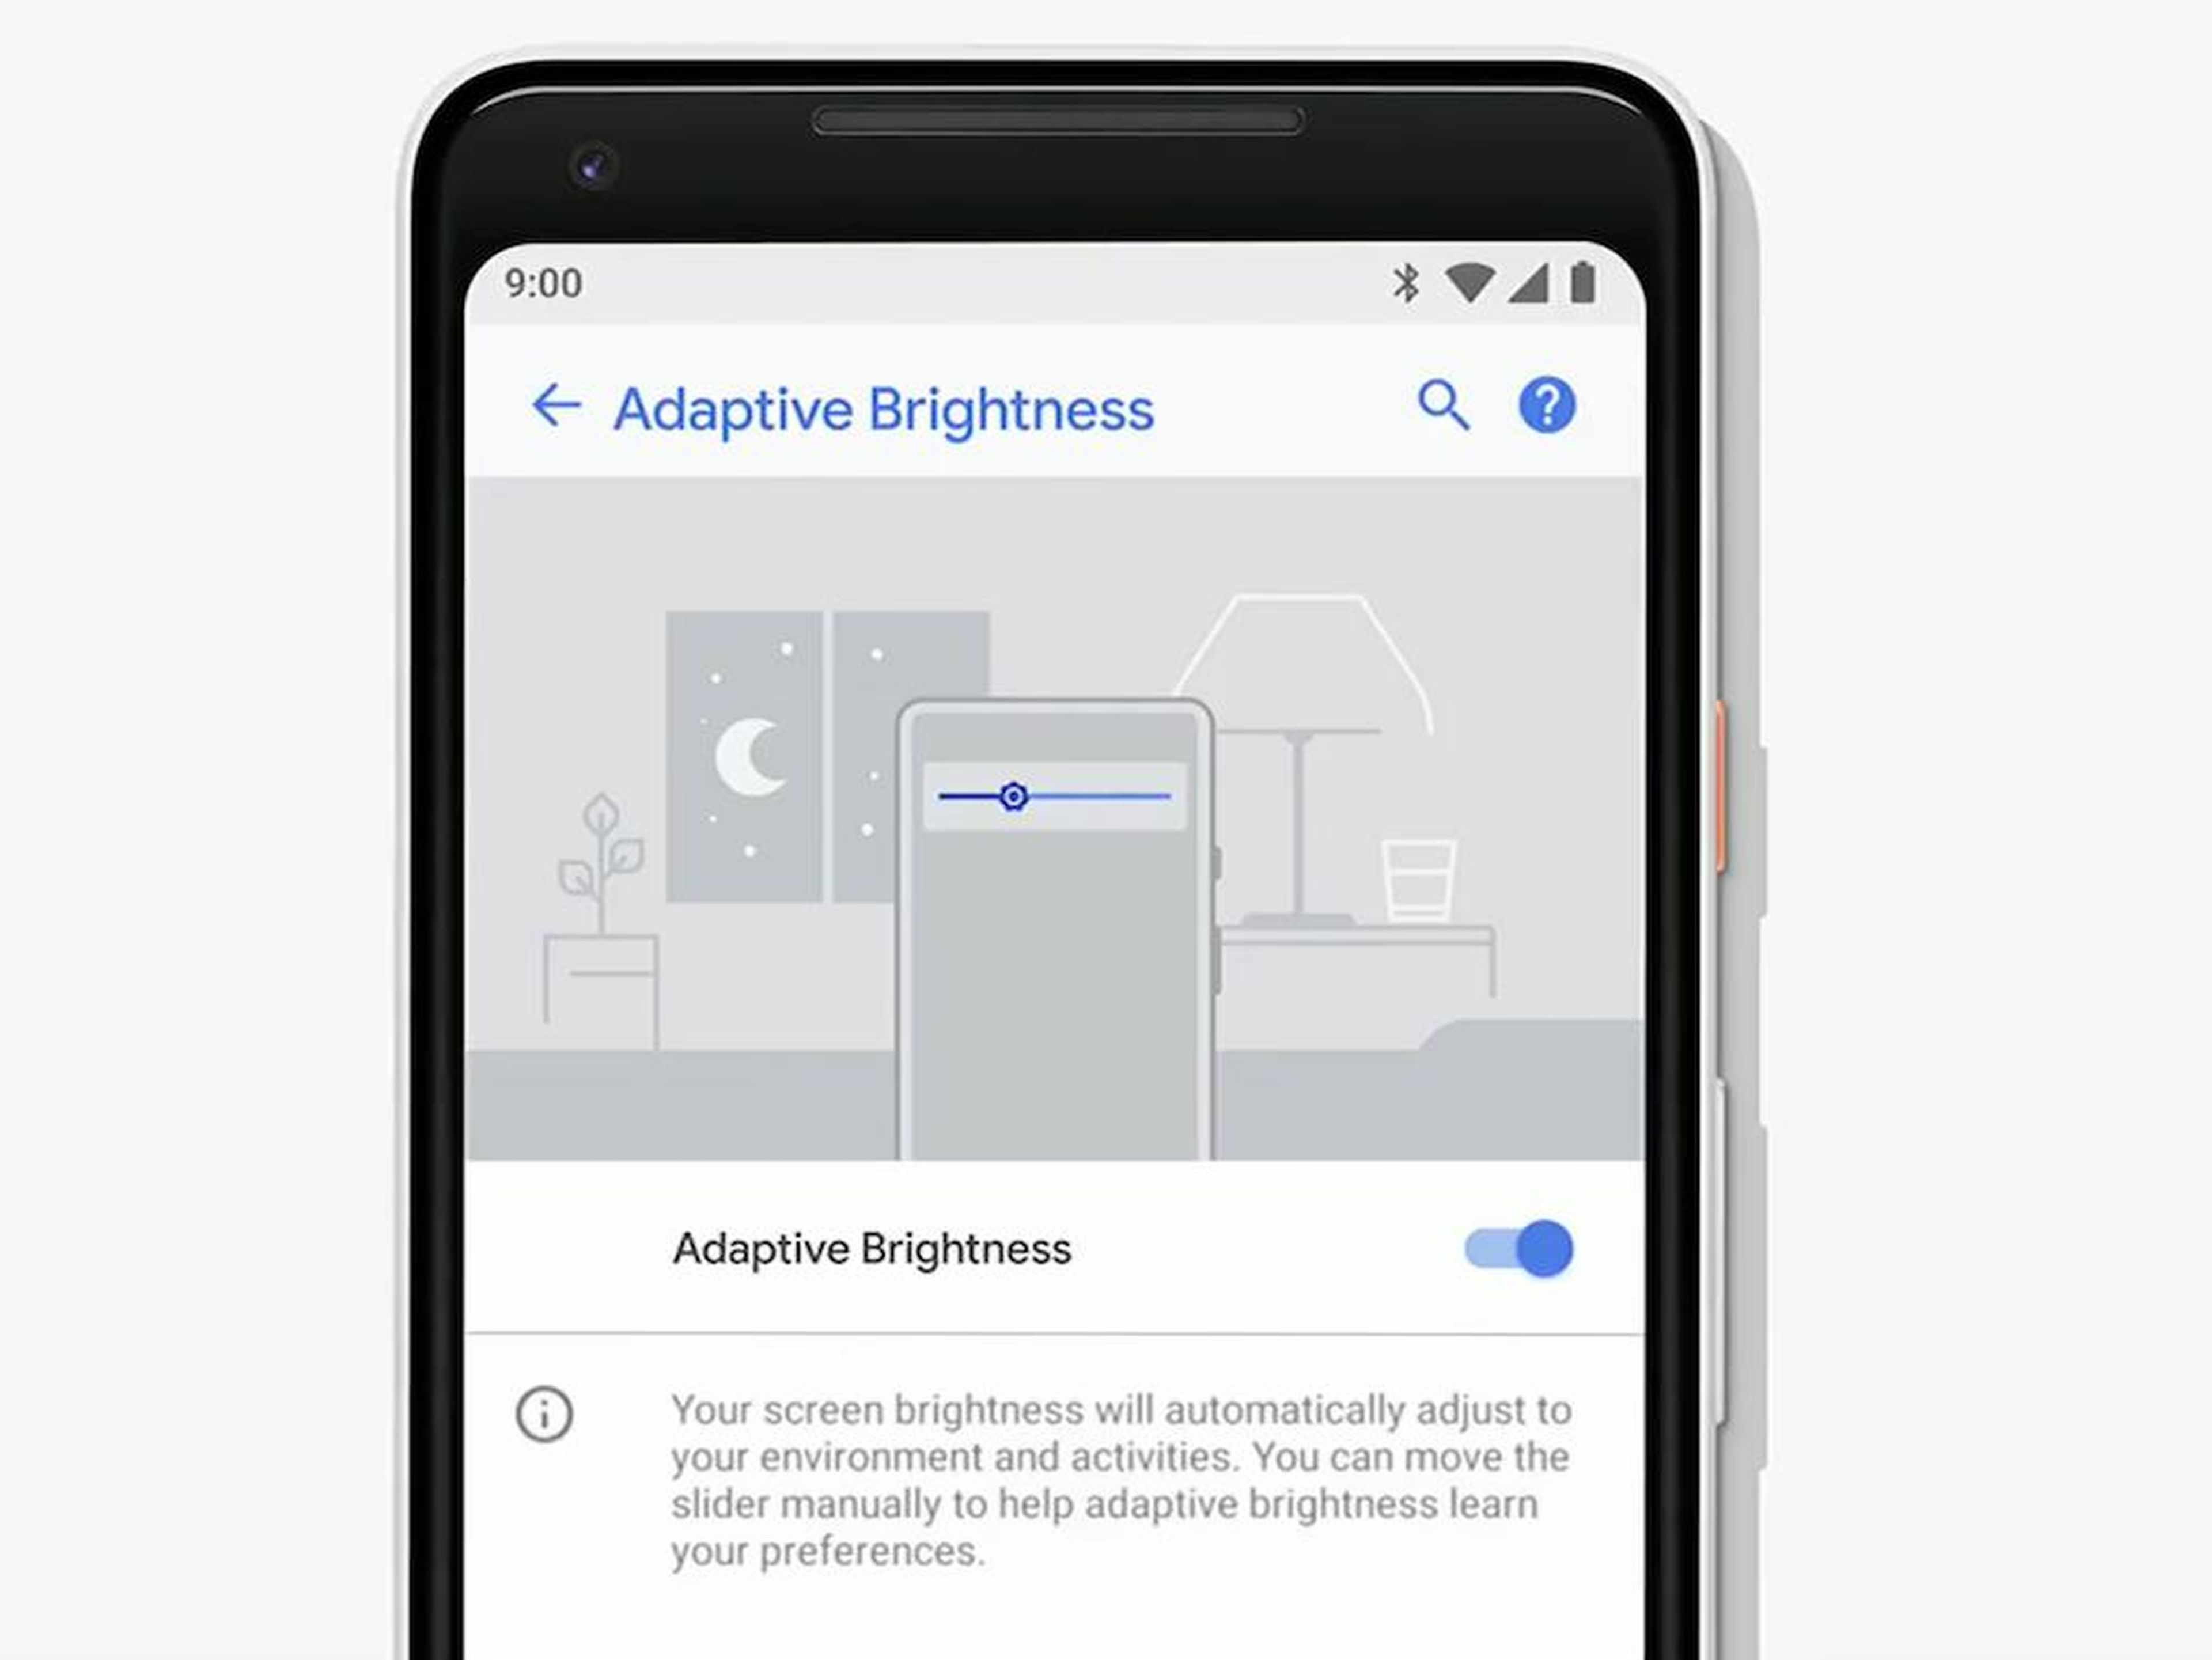 Adaptive Brightness will go one step further than simply adjusting your screen's brightness based on your surroundings.